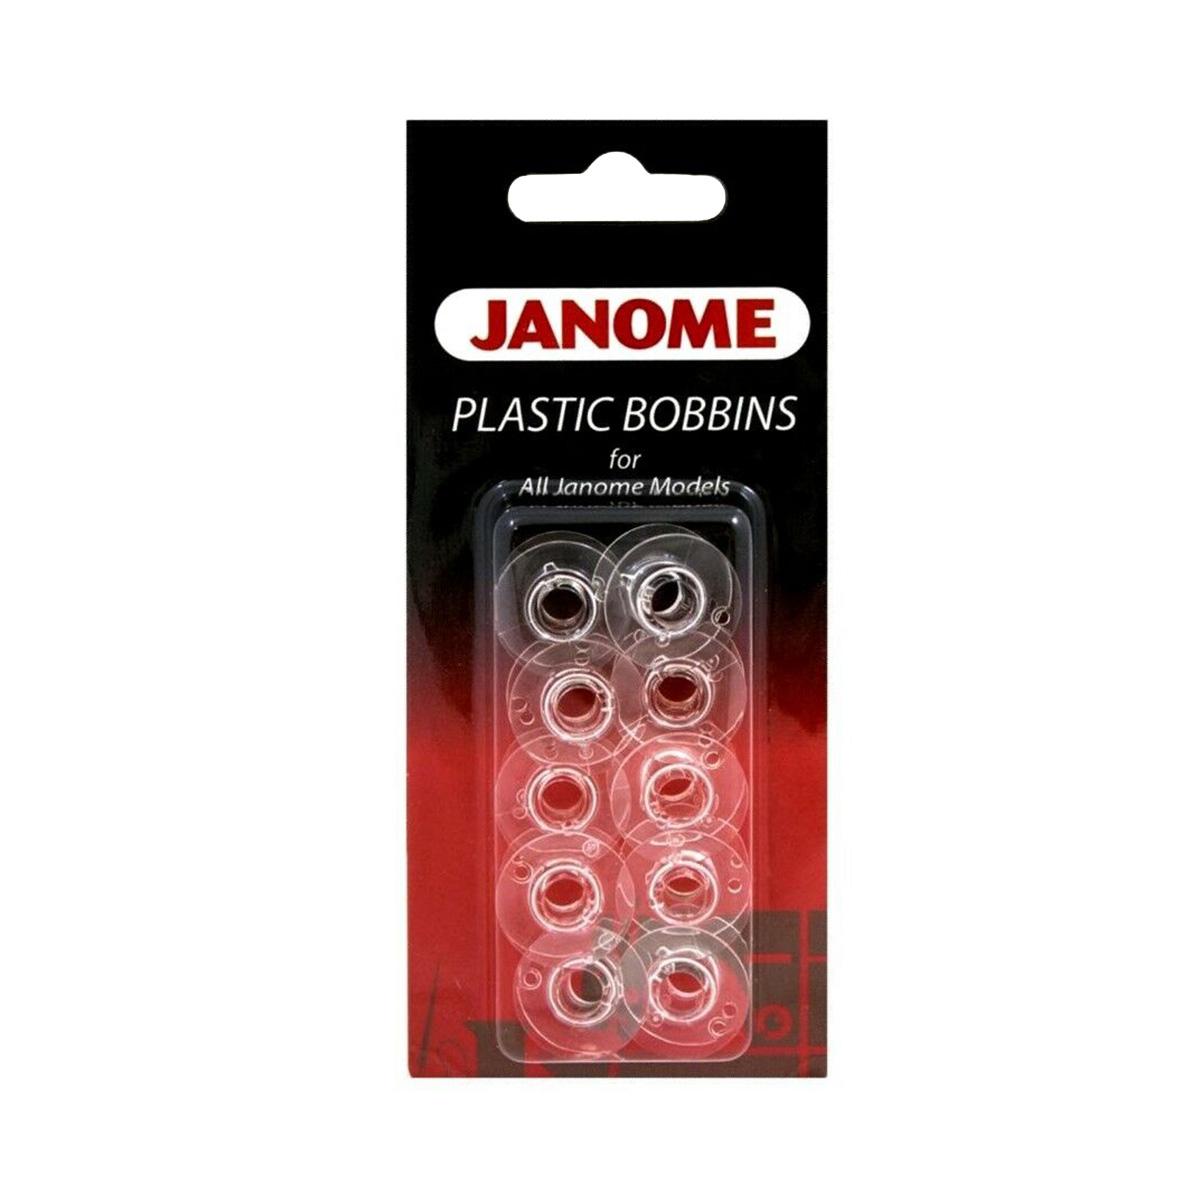 Janome 10 pack Bobbins - a perfect fit for all Janome models